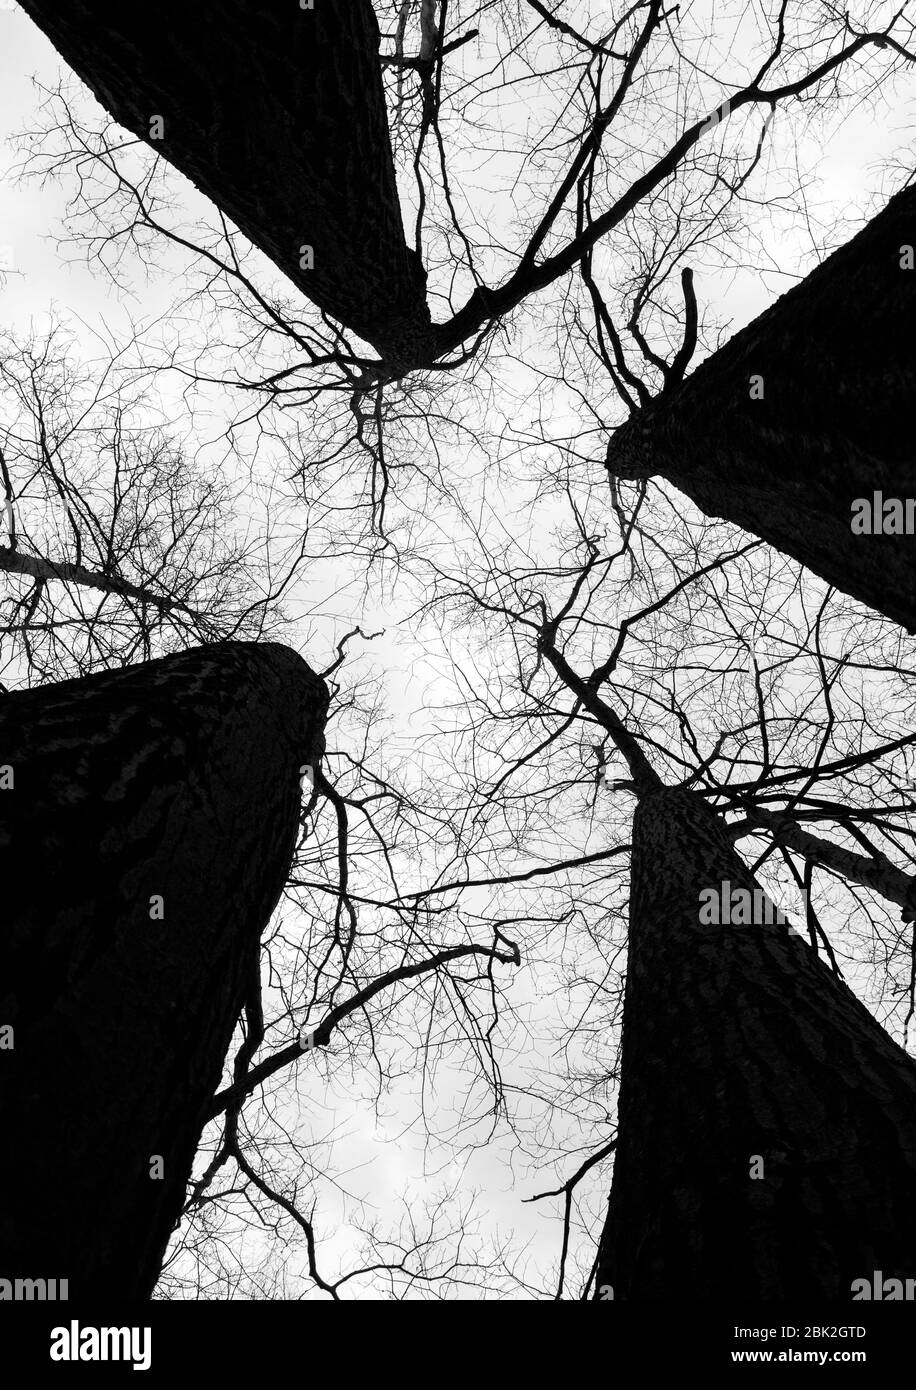 The dark trunks of four leafless trees rise up towards an empty sky in a forest in Ithaca, NY, USA Stock Photo